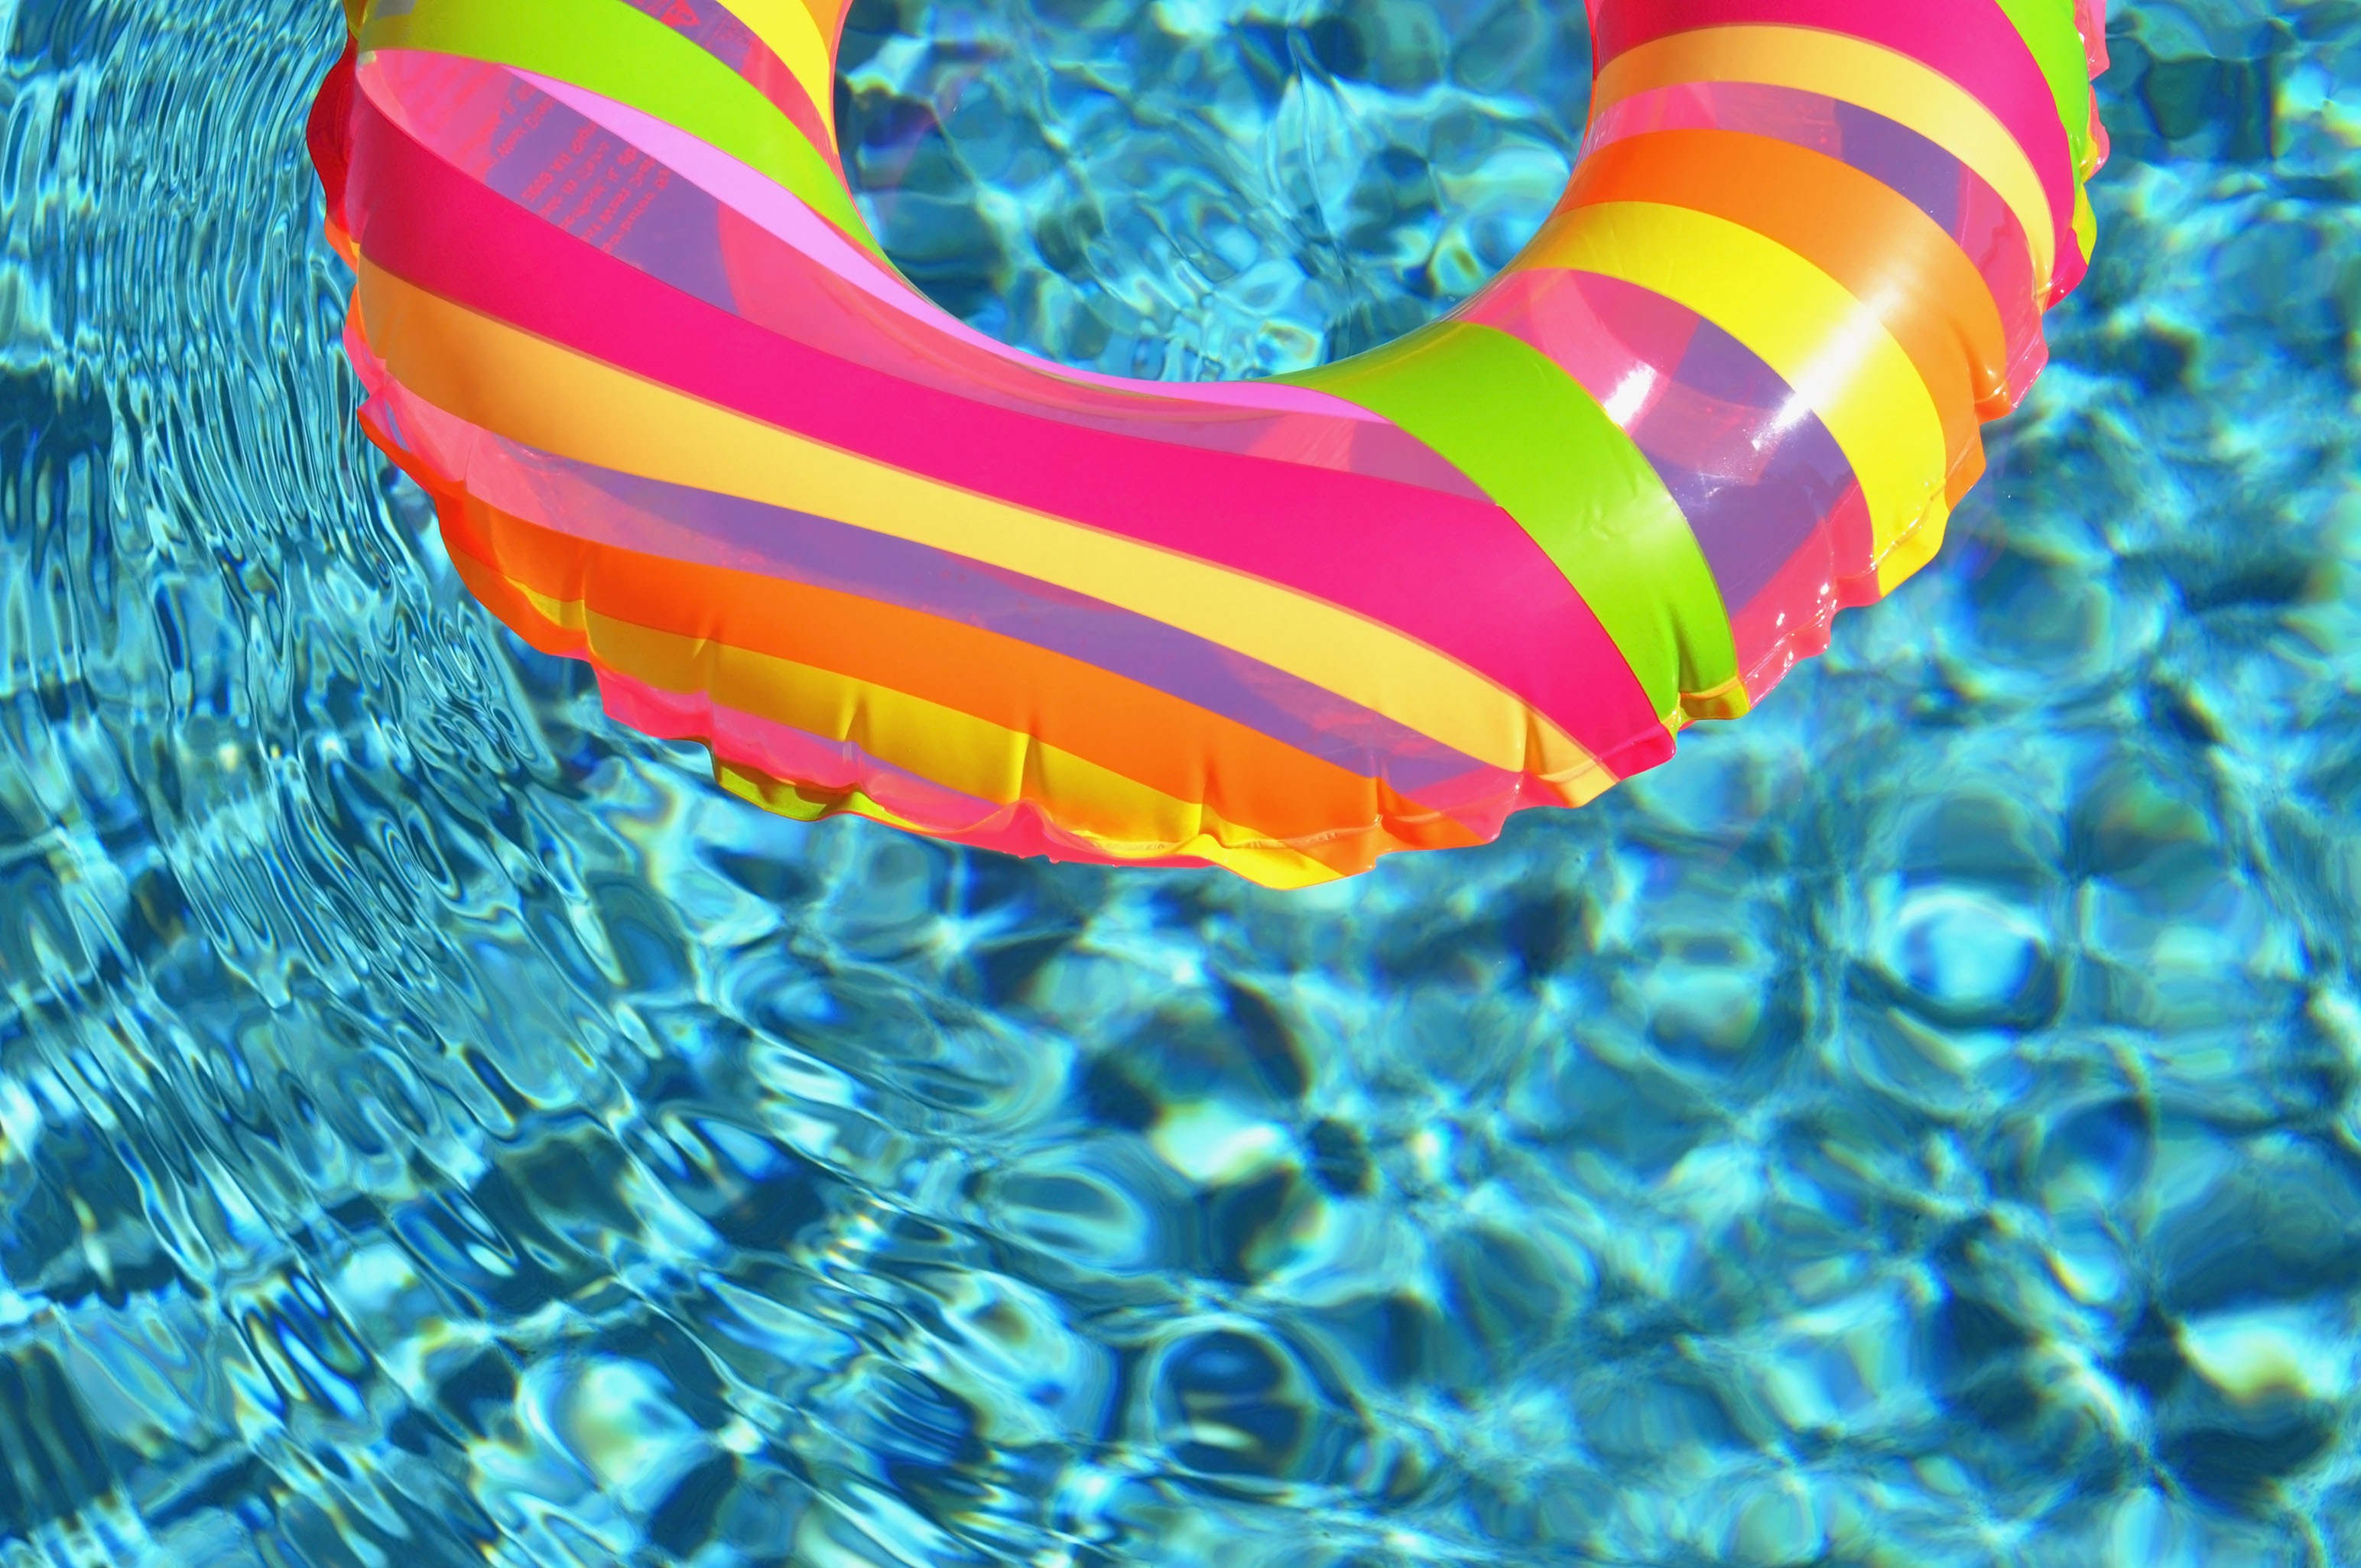 water-ring-swimming-pool-blue-float-toy-1354482-pxhere.com